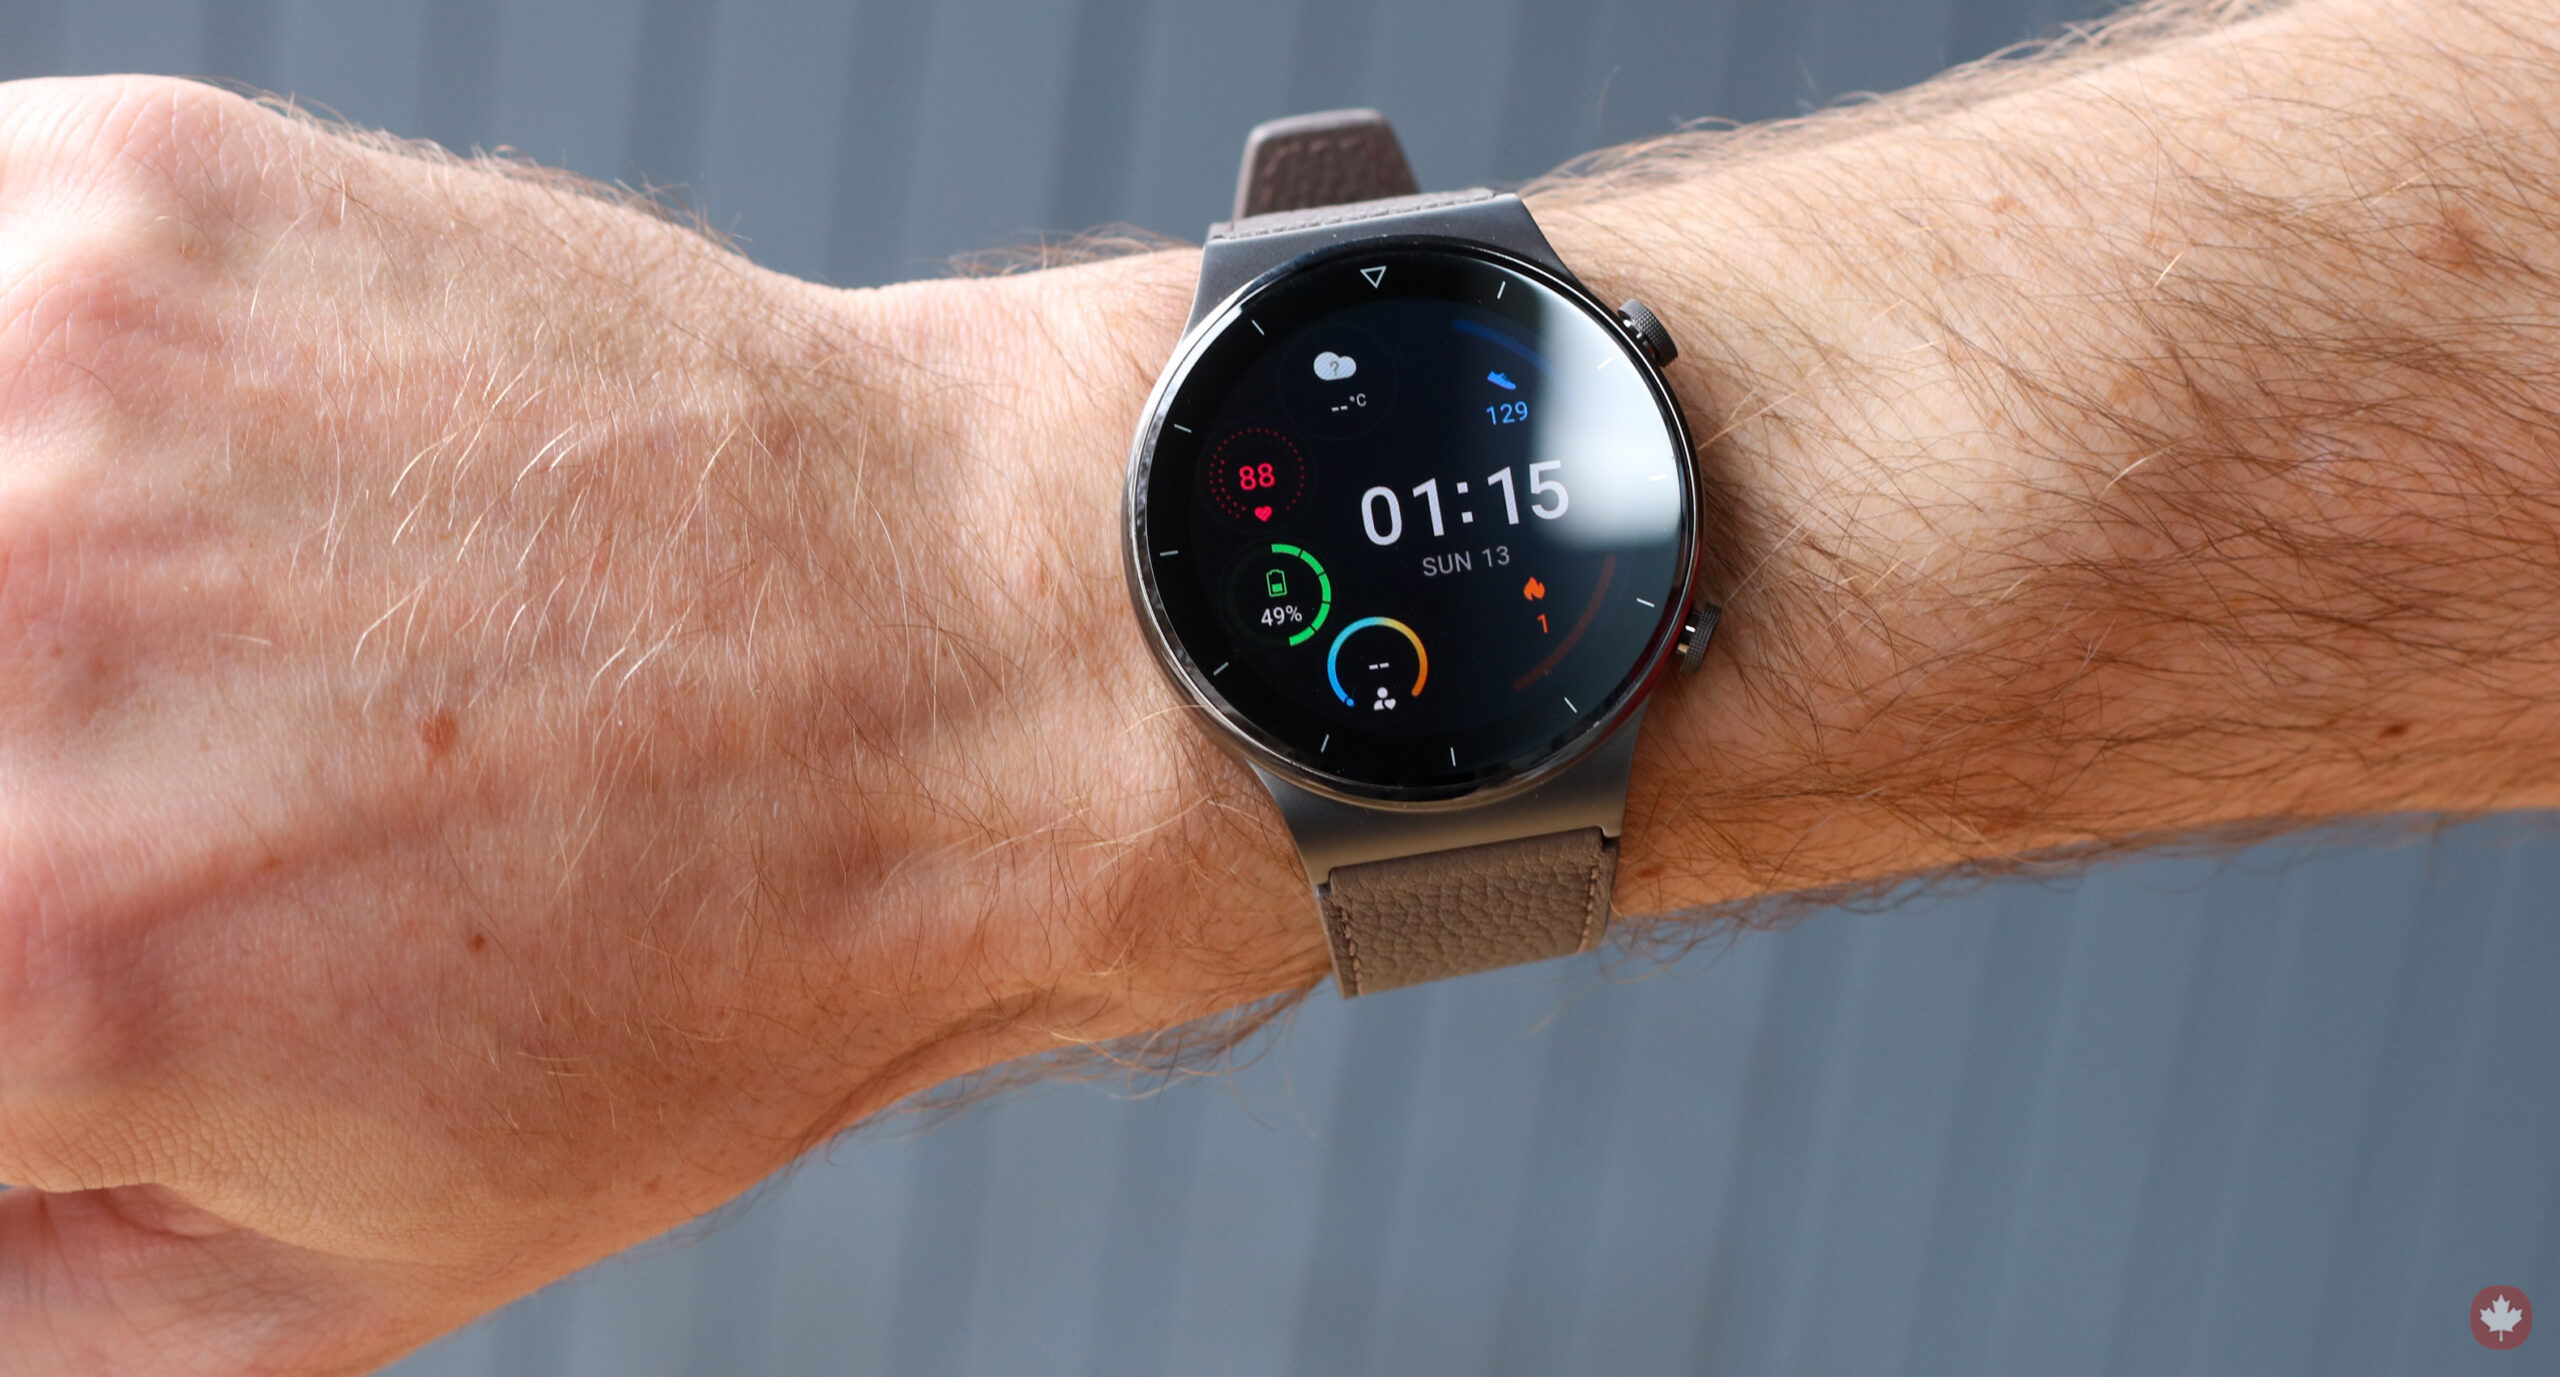 Huawei's Watch GT 2 Pro features a bold design and is full of features